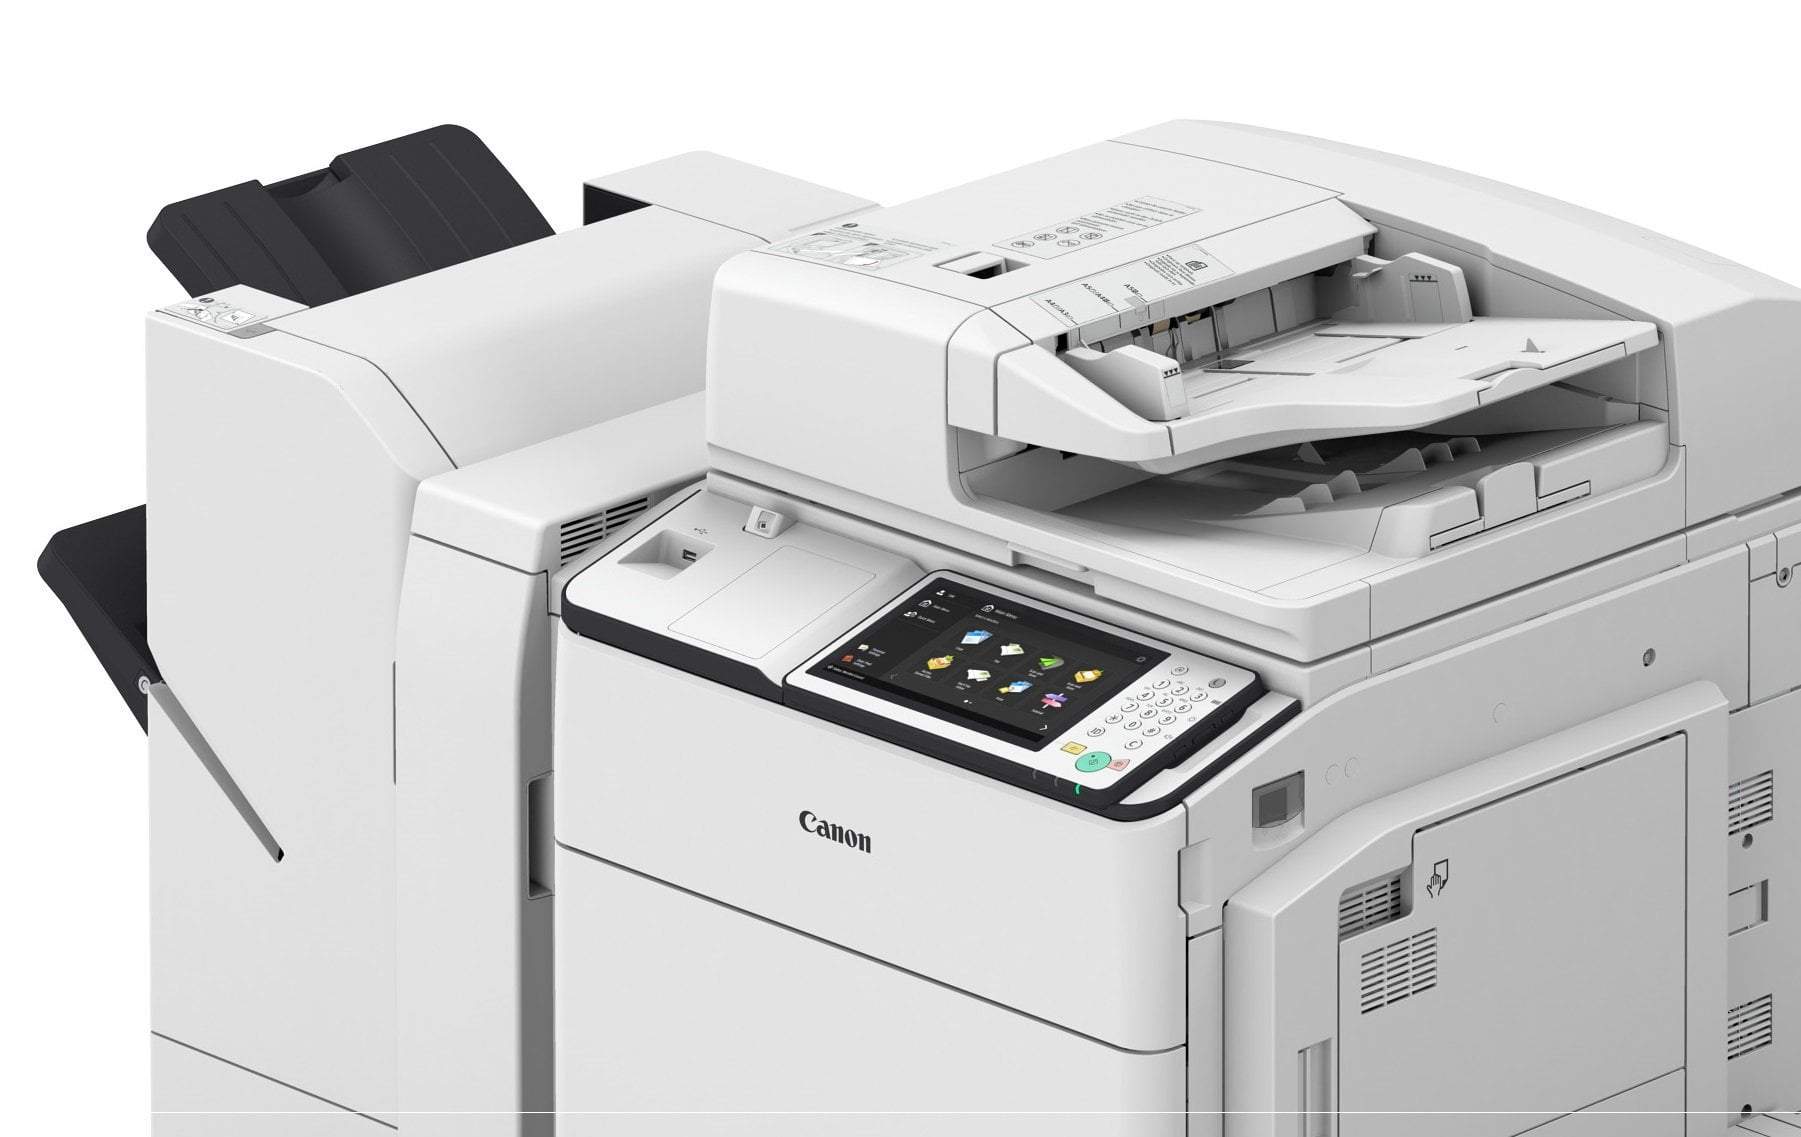 LEASE TO OWN OR BUY CANON LASER MULTIFUNCTION imageRUNNER ADVANCE C7565i